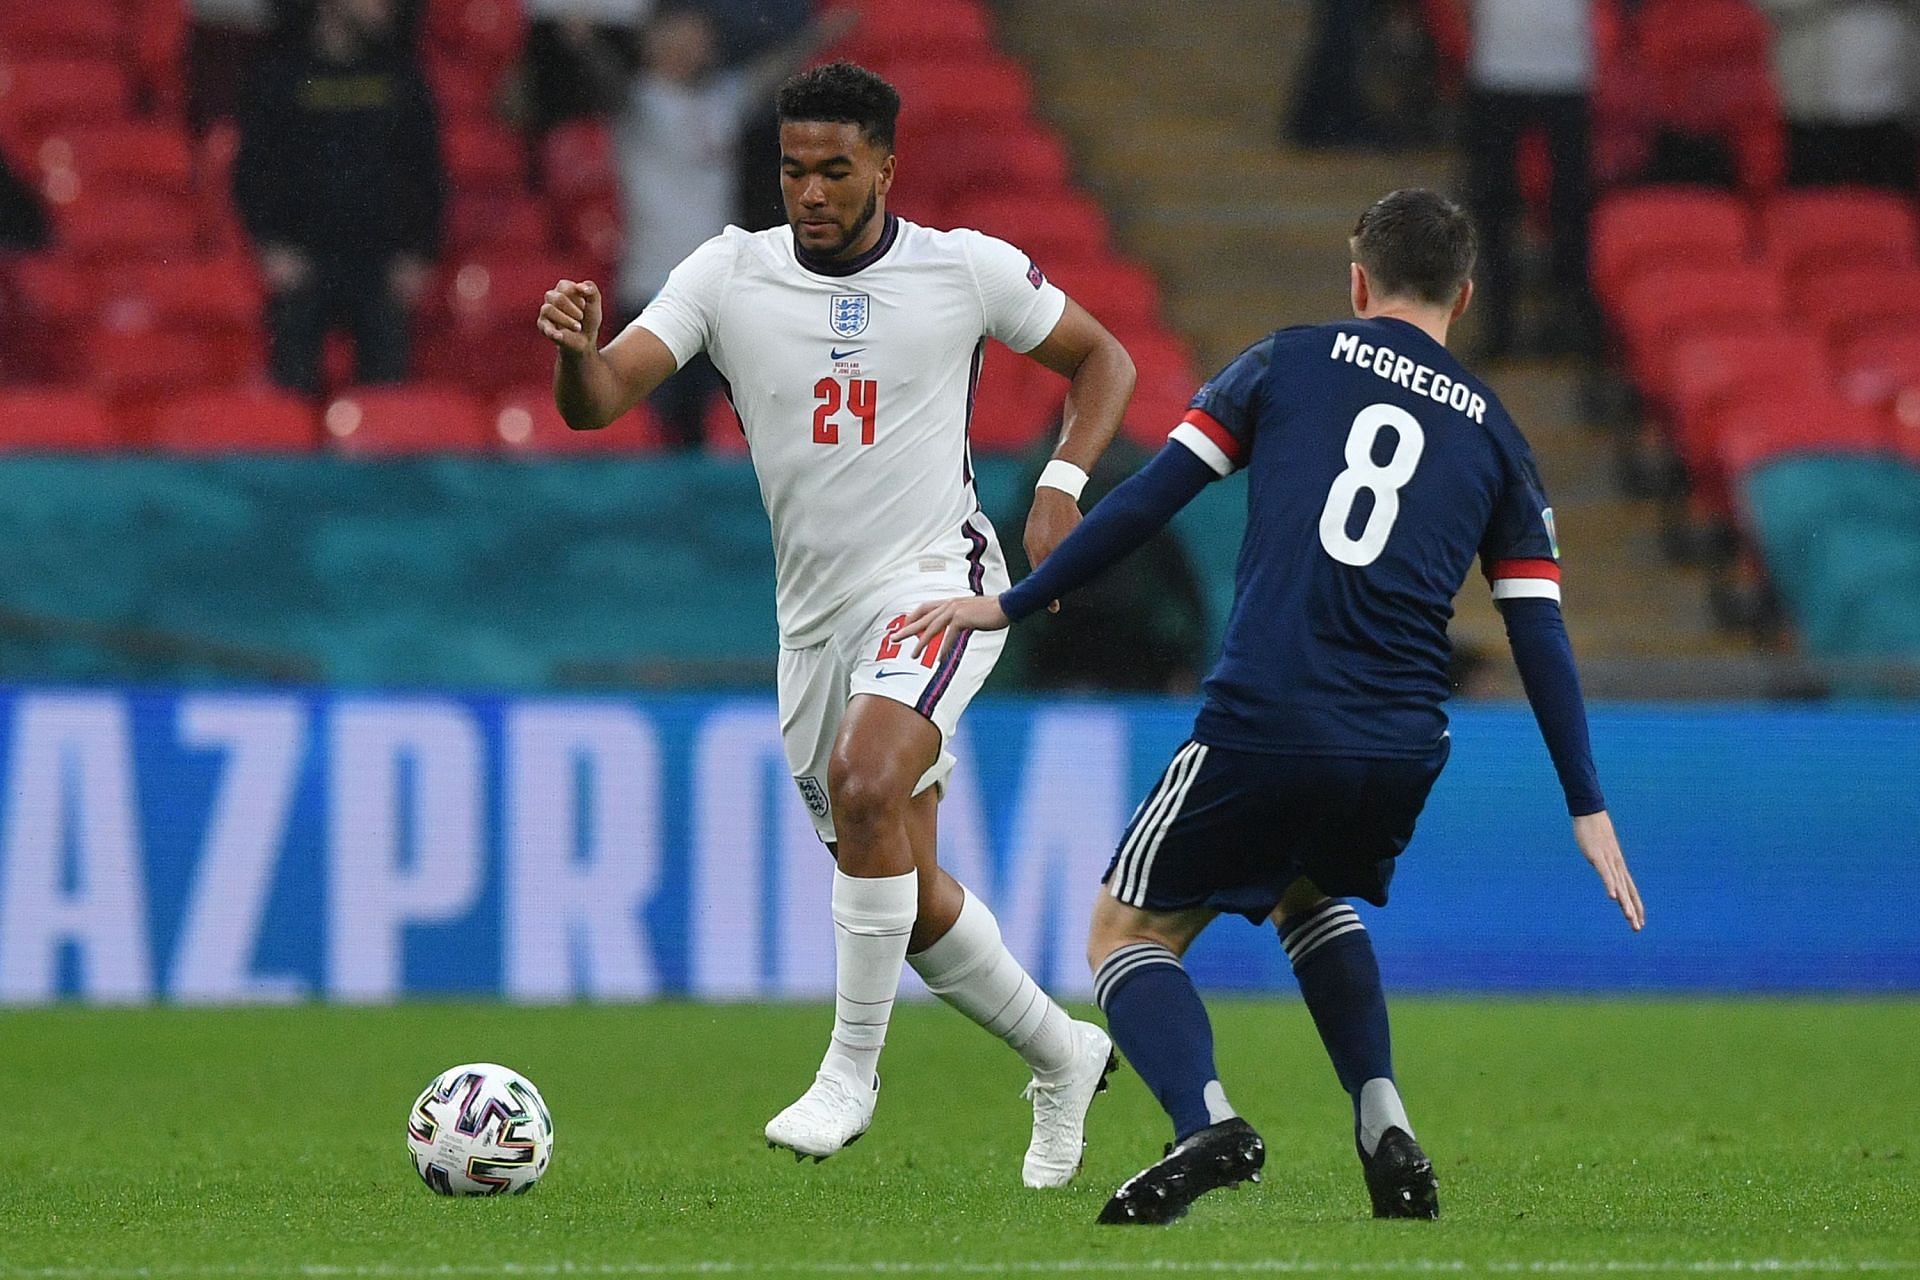 Reece James is another England player in doubt for 2022 FIFA World Cup